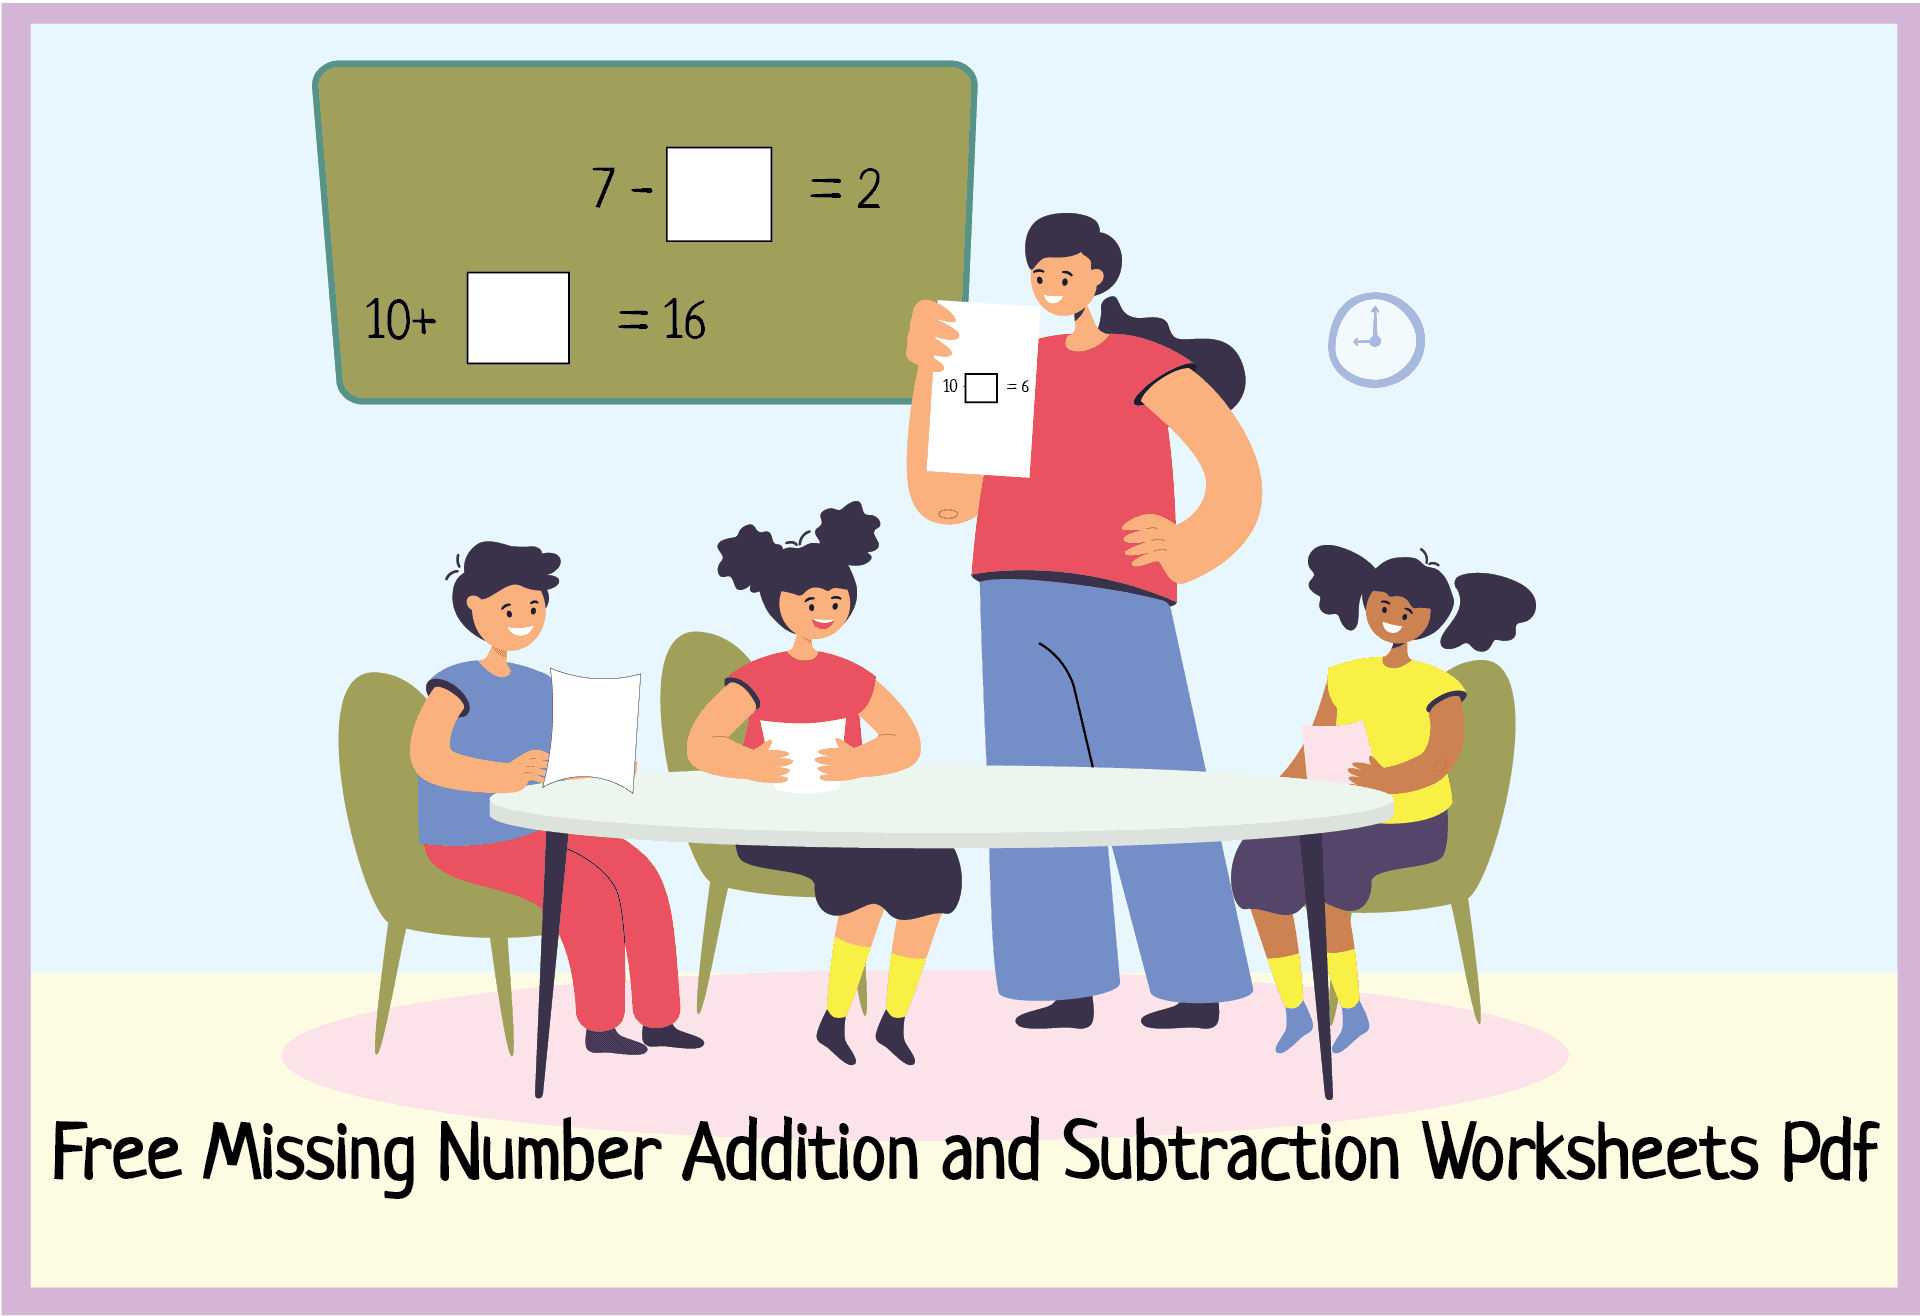 11 Free Find Missing Number Addition and Subtraction Worksheets PDF